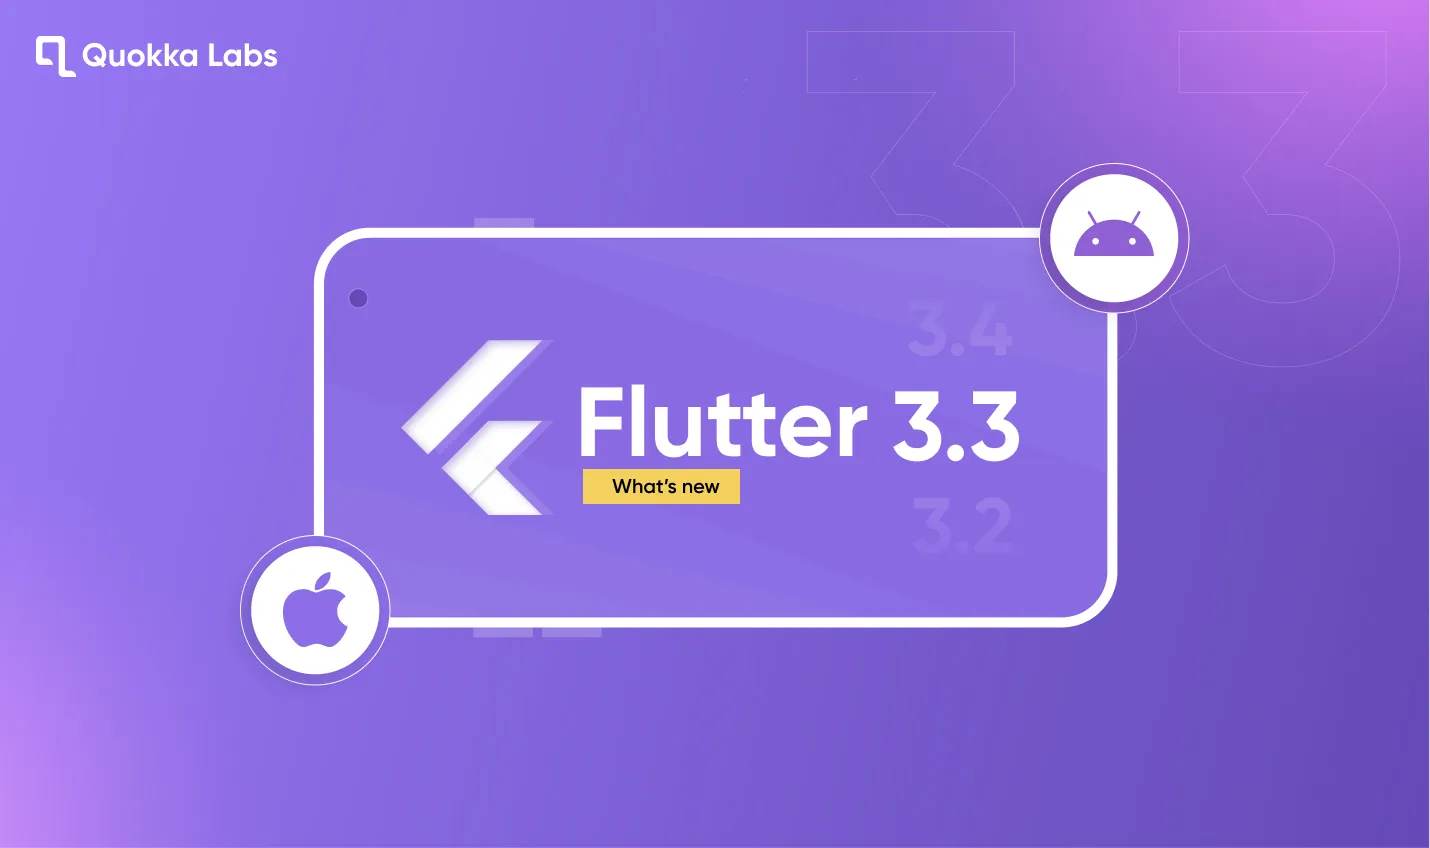 What is New in Flutter 3.3?